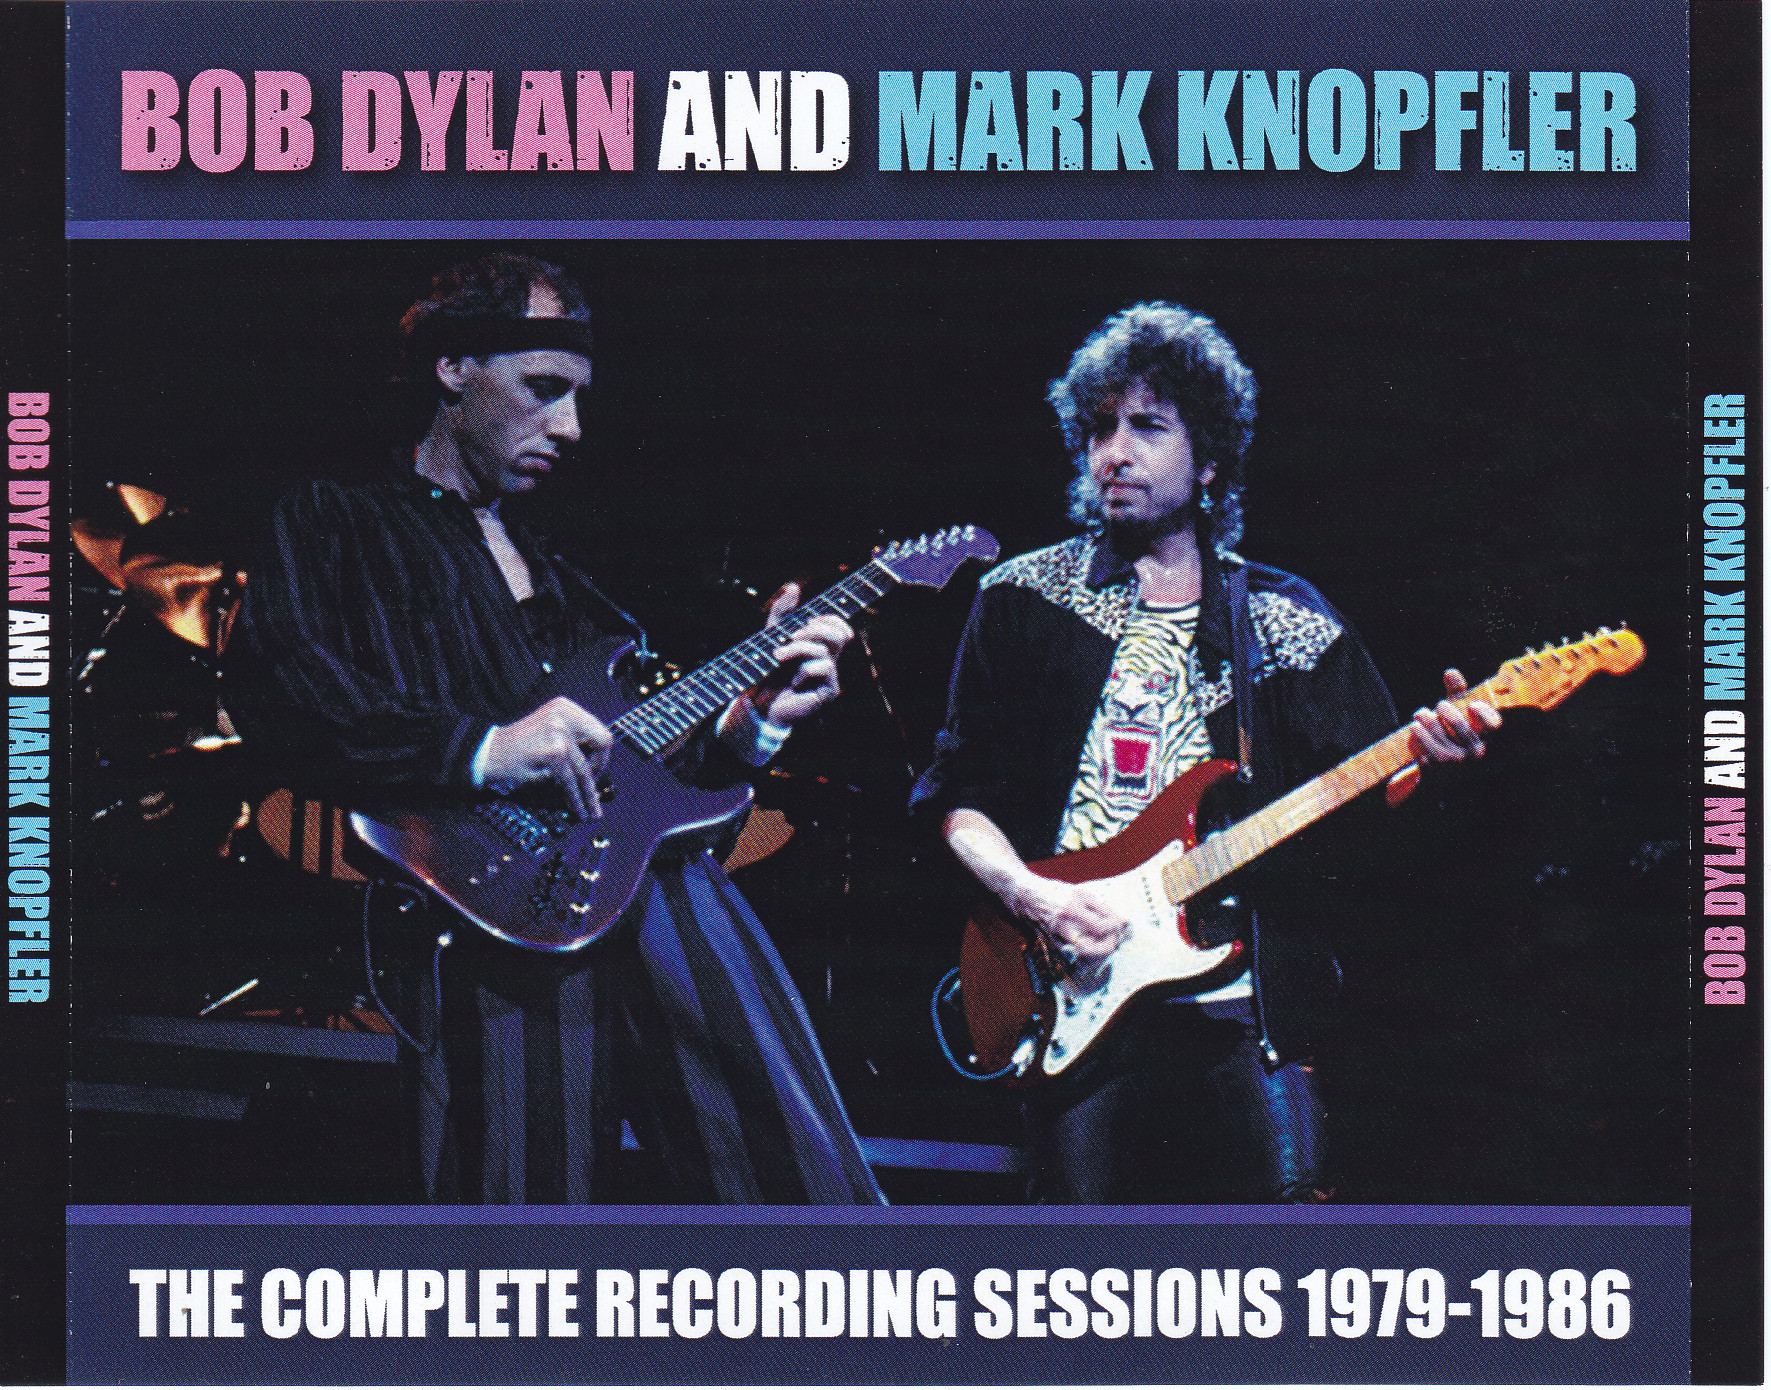 Bob Dylan & Mark Knopfler/ The Complete Recording Sessions 1979